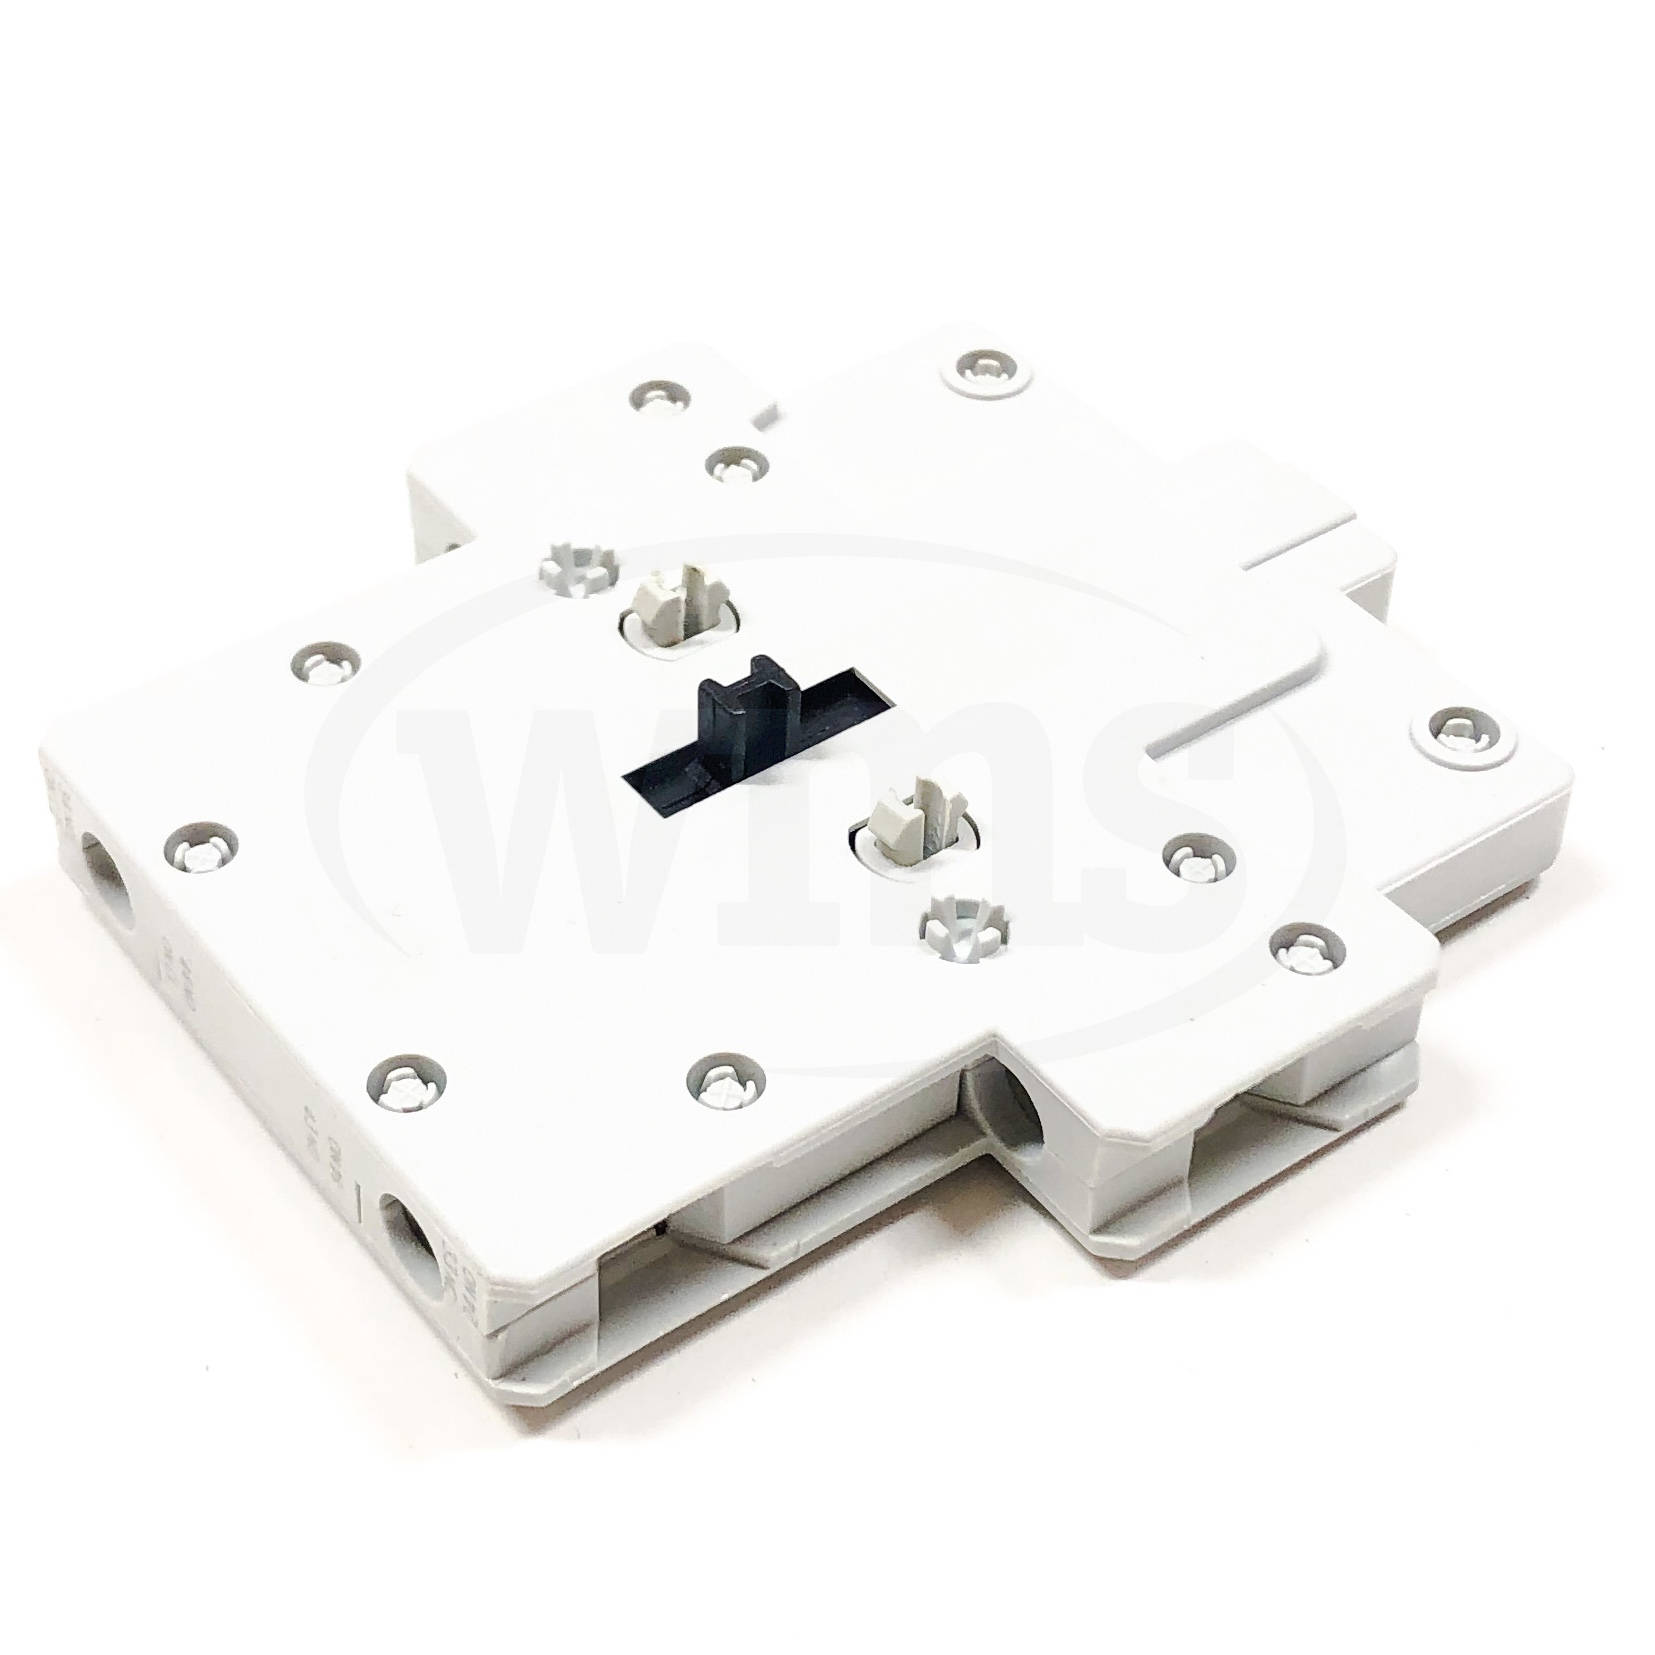 BCLL20 General Electric Contact Block 2